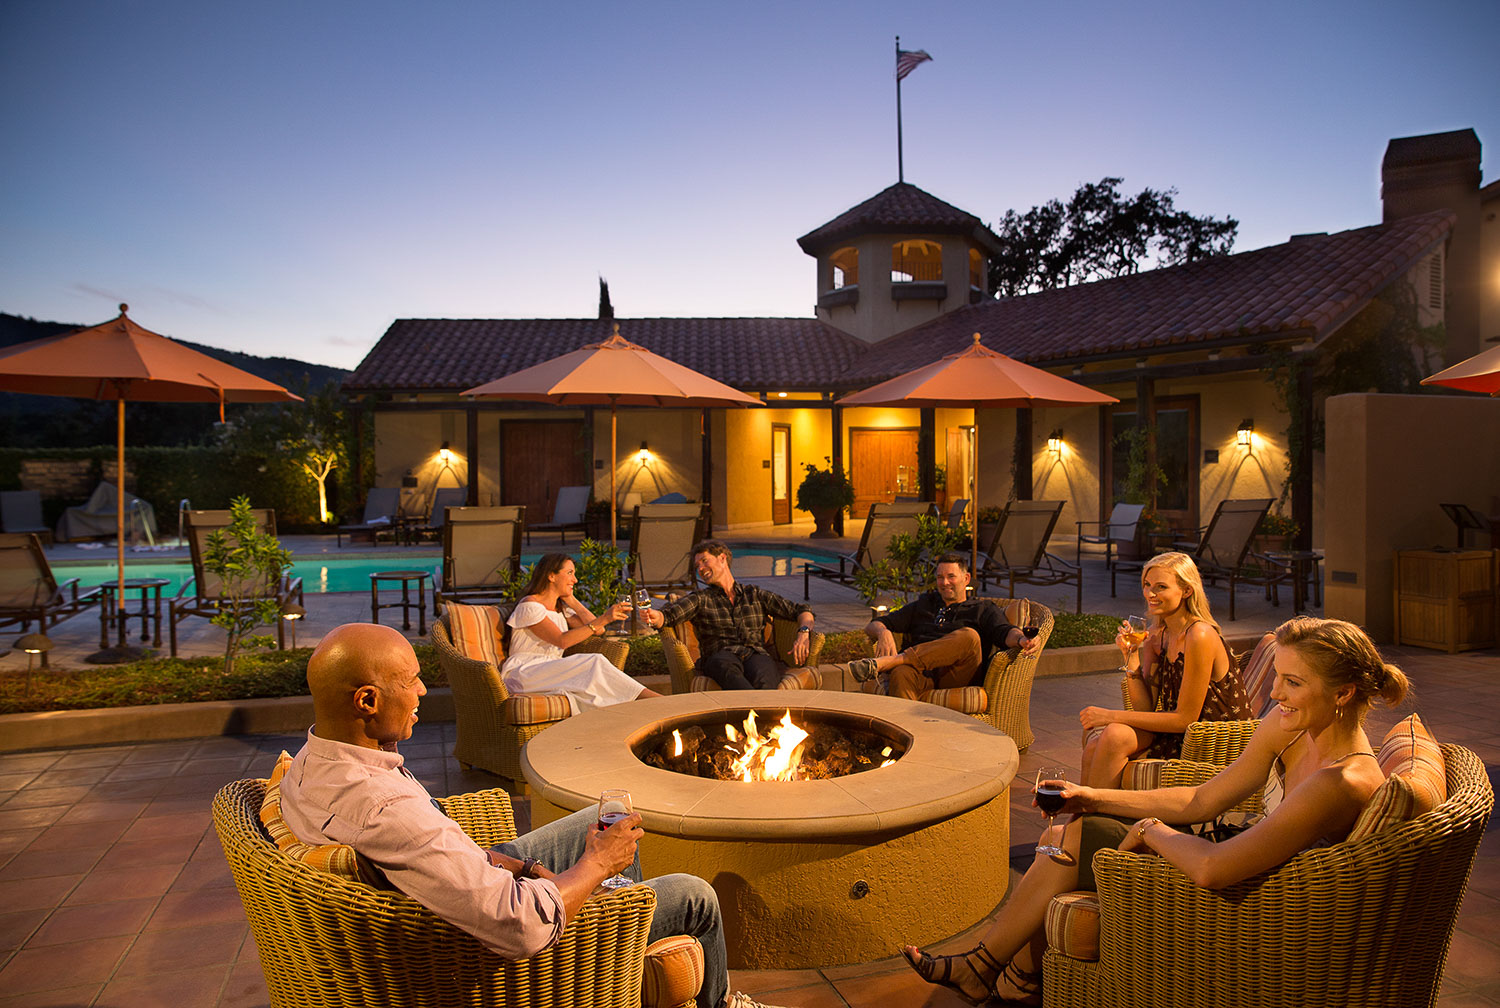 A group of people gathering by the courtyard fire pits at night